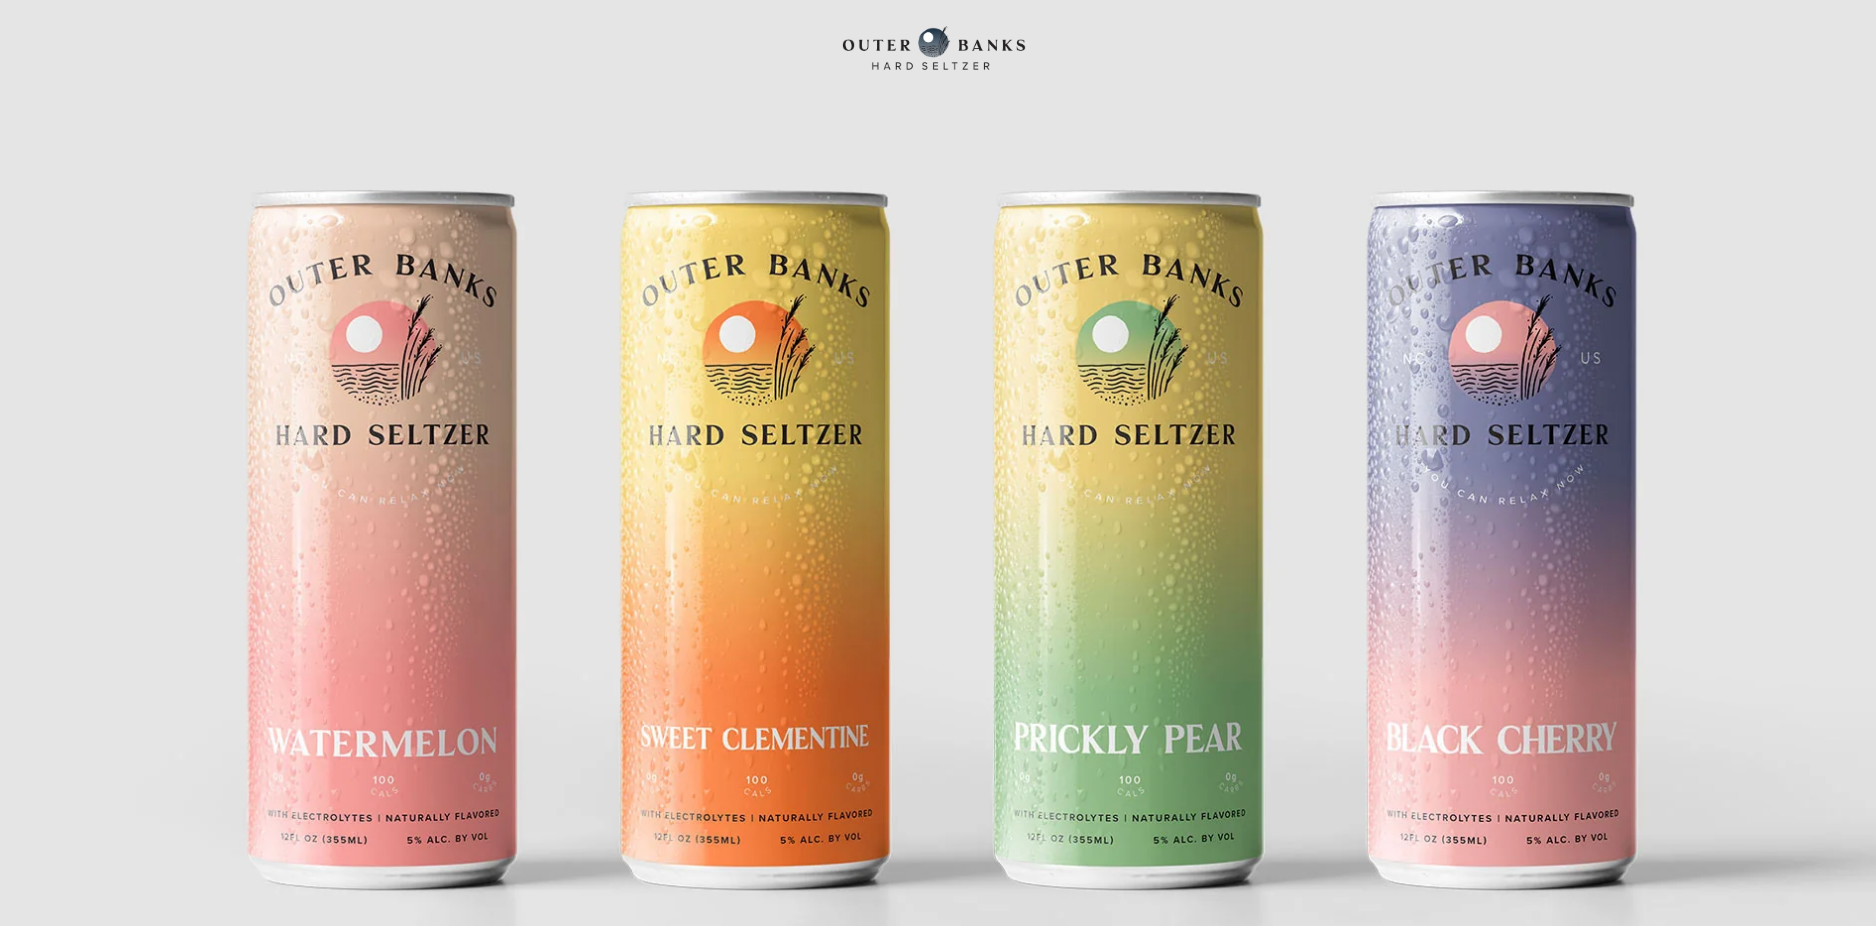 VIDEO: Created by @OuterBanksMom Audra Krieg, Outer Banks Hard Seltzer launches in May